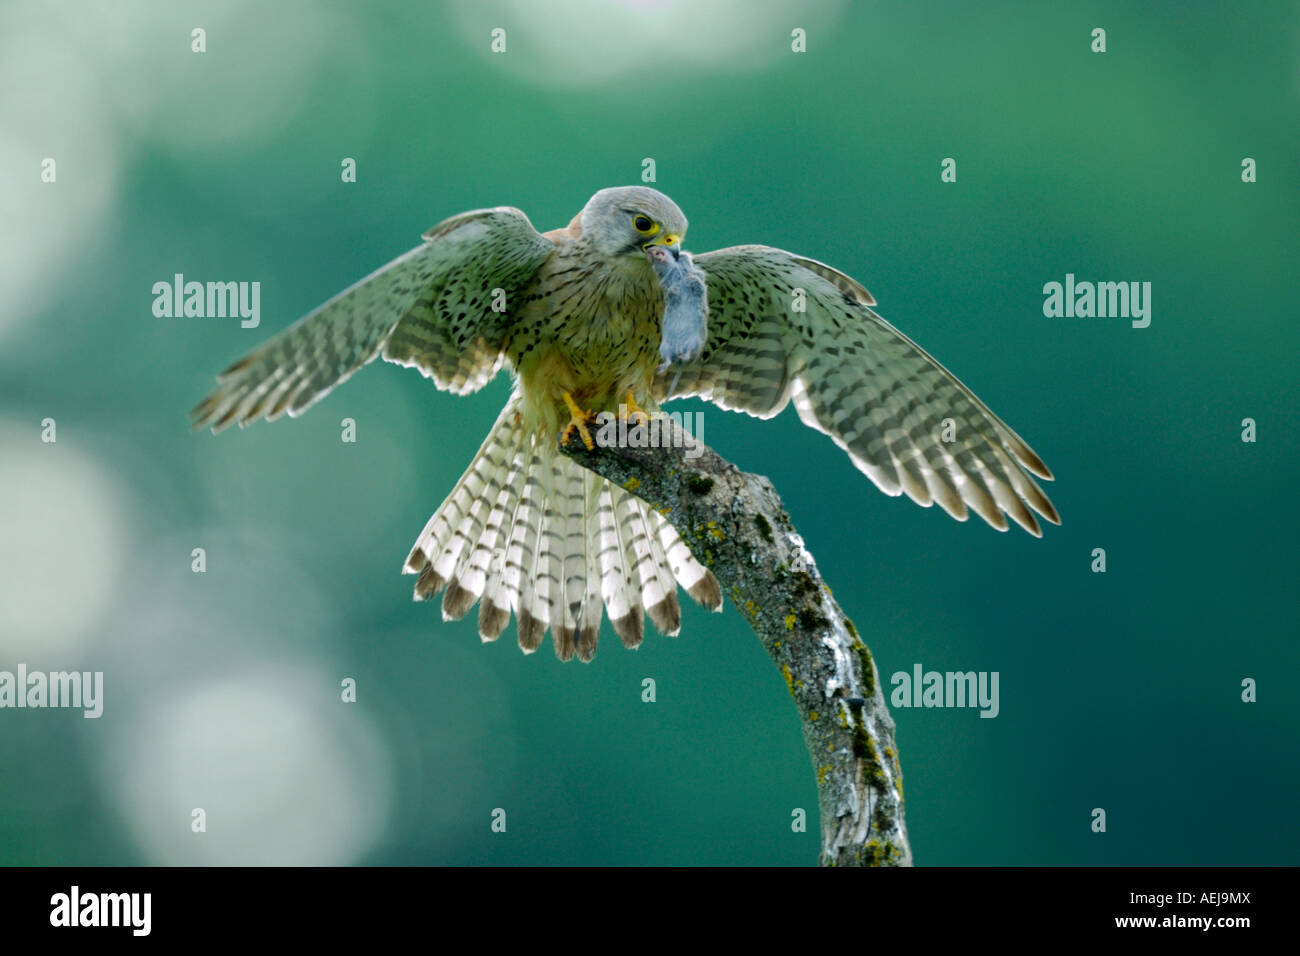 Common Kestrel (Falco tinnunculus) with its bag in the back light Stock Photo